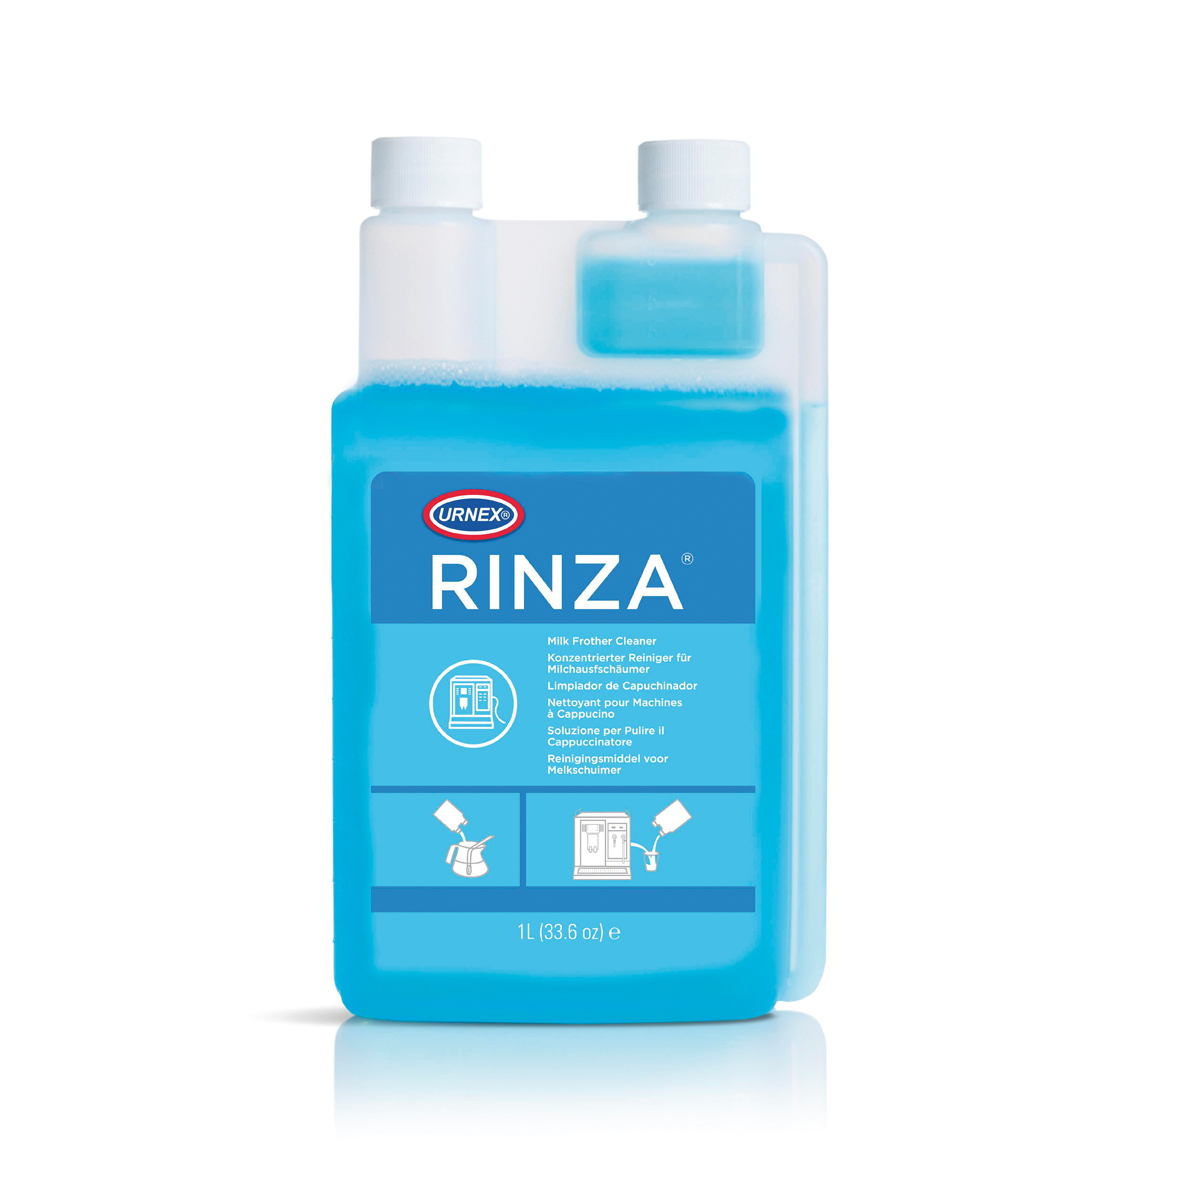 Rinza Milk Frother Cleaning Liquid